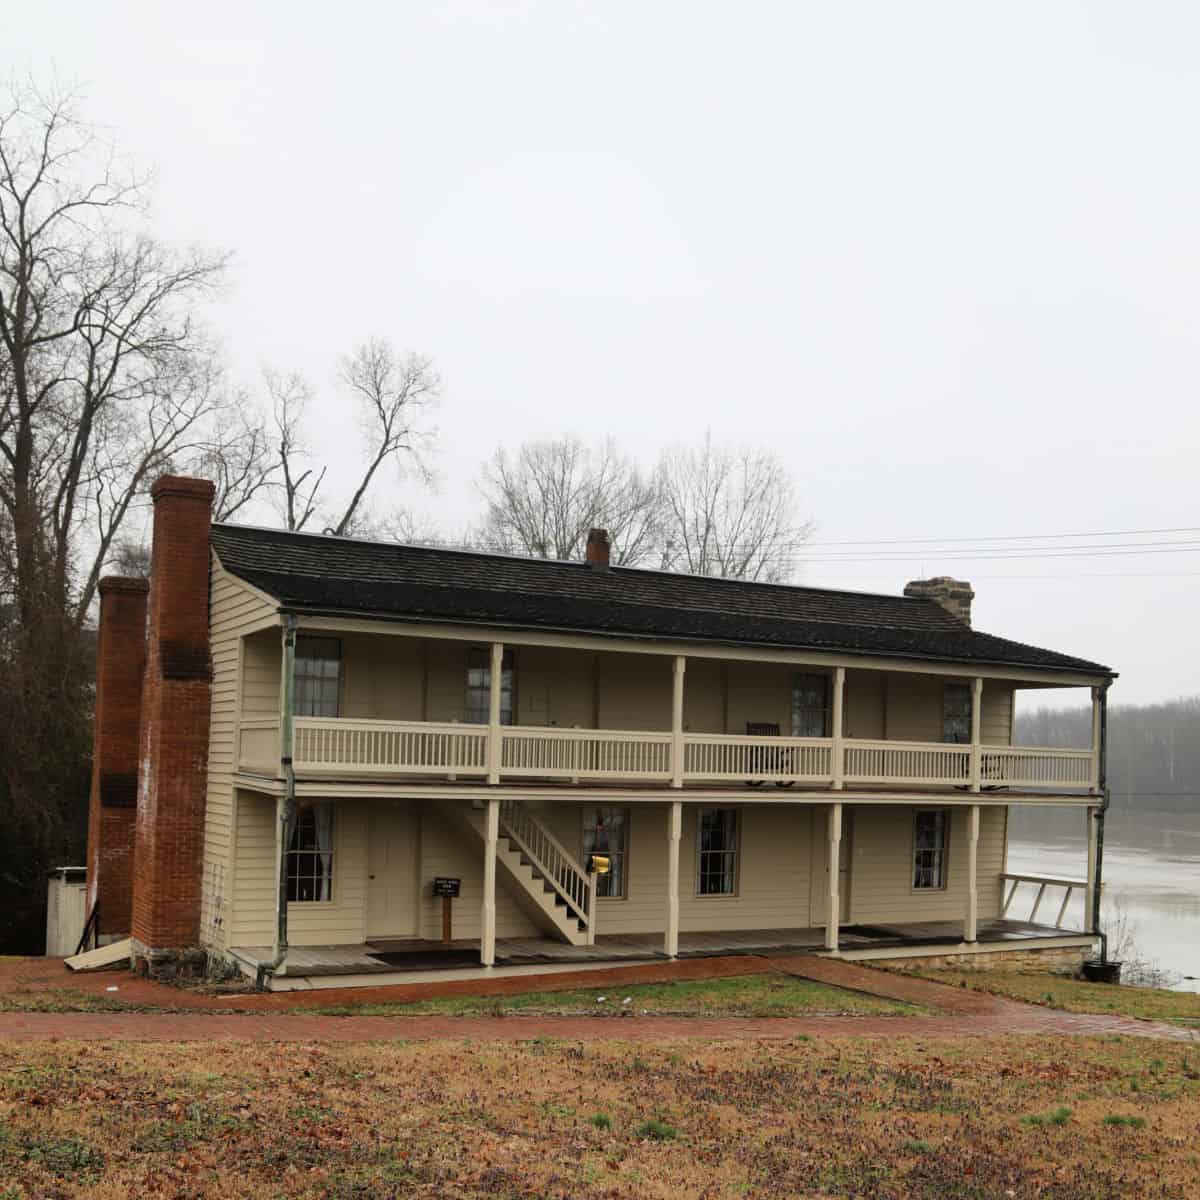 Dover Hotel also known as the Surrender House at Fort Donelson National Battlefield